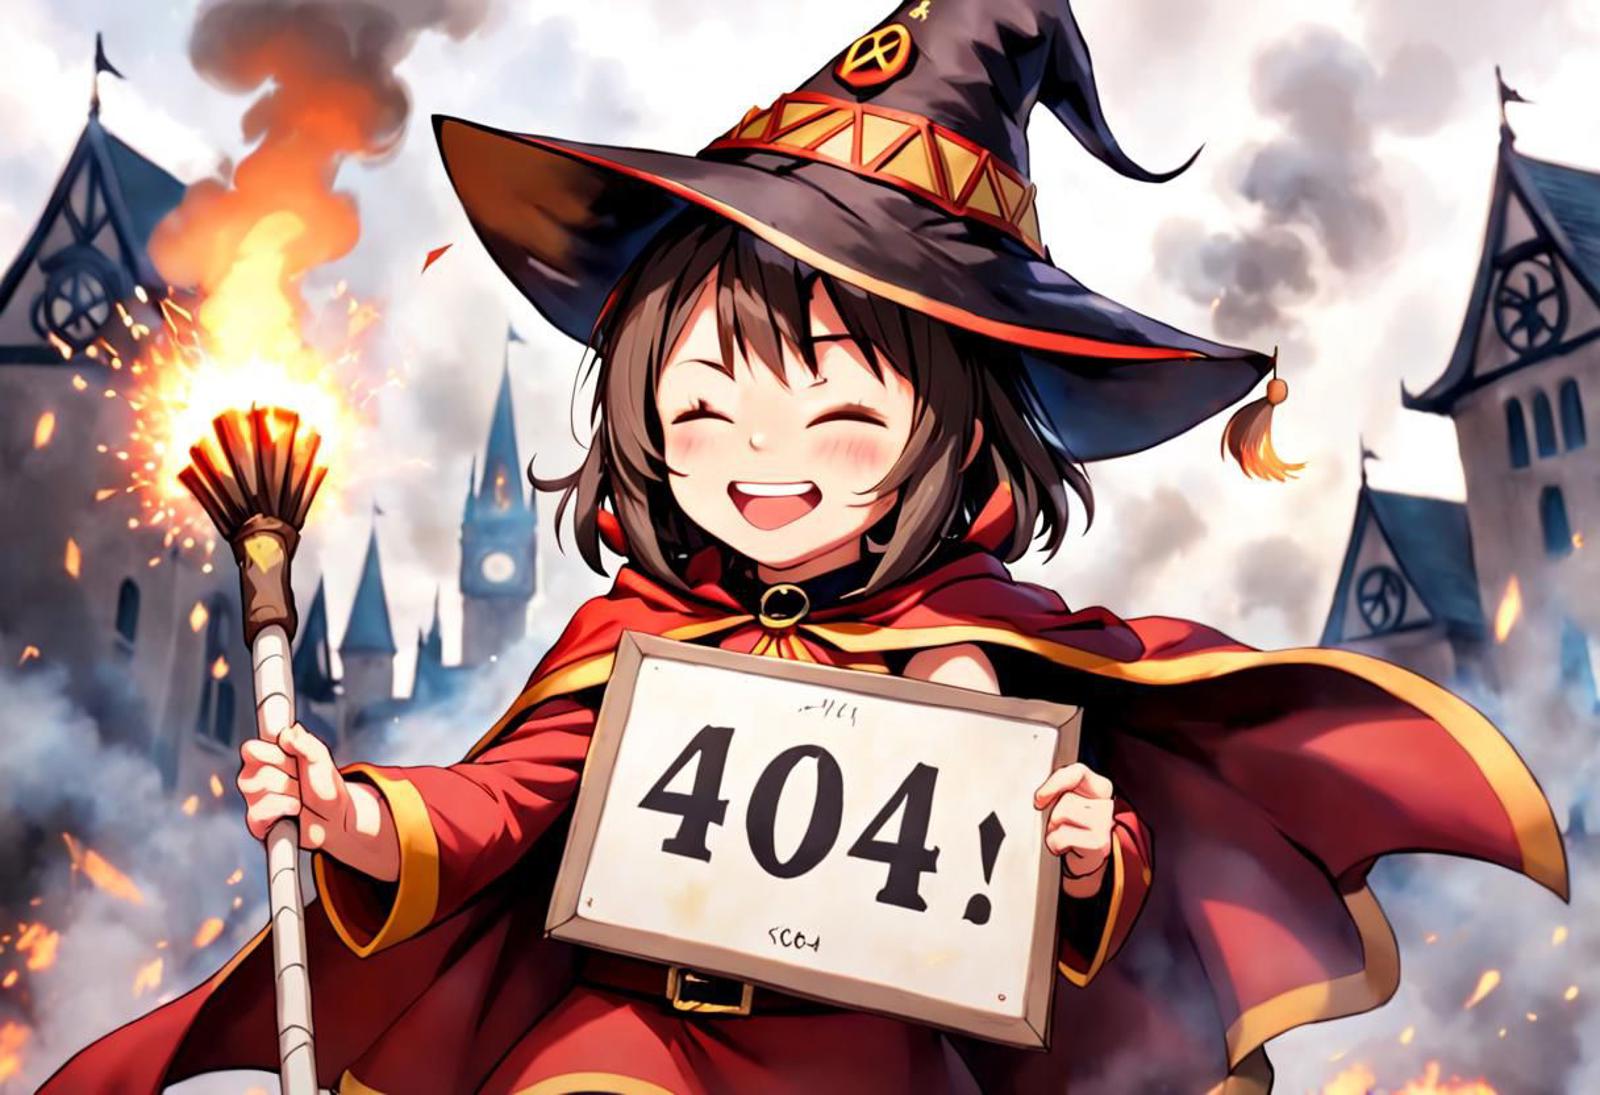 A cartoon girl with a wizard's hat holding a 404 sign.